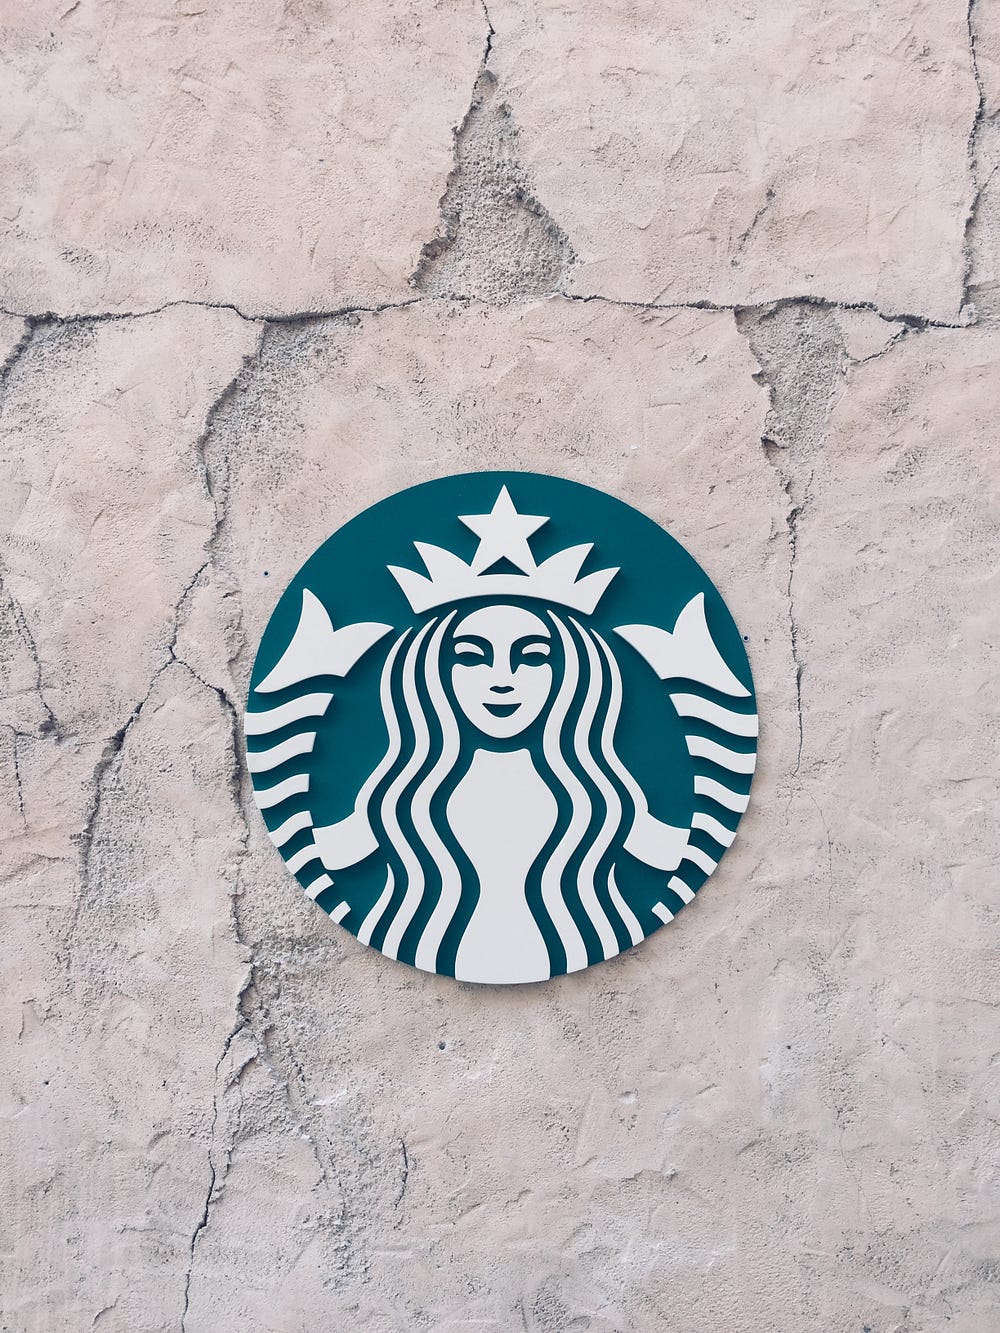 Picture of the Starbucks logo